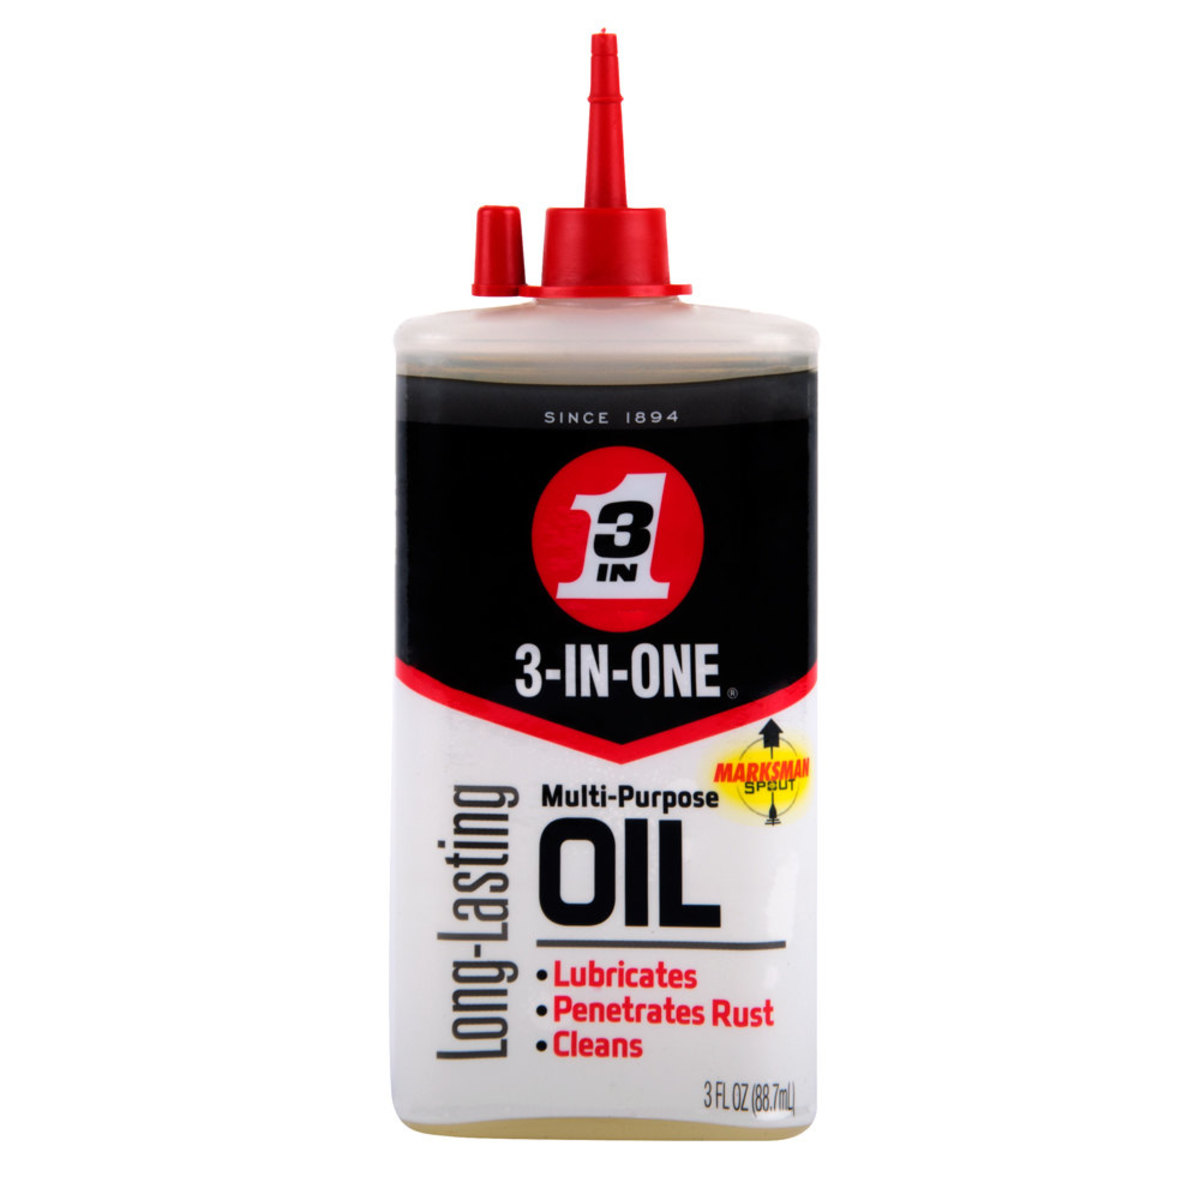 3-IN-ONE Oil